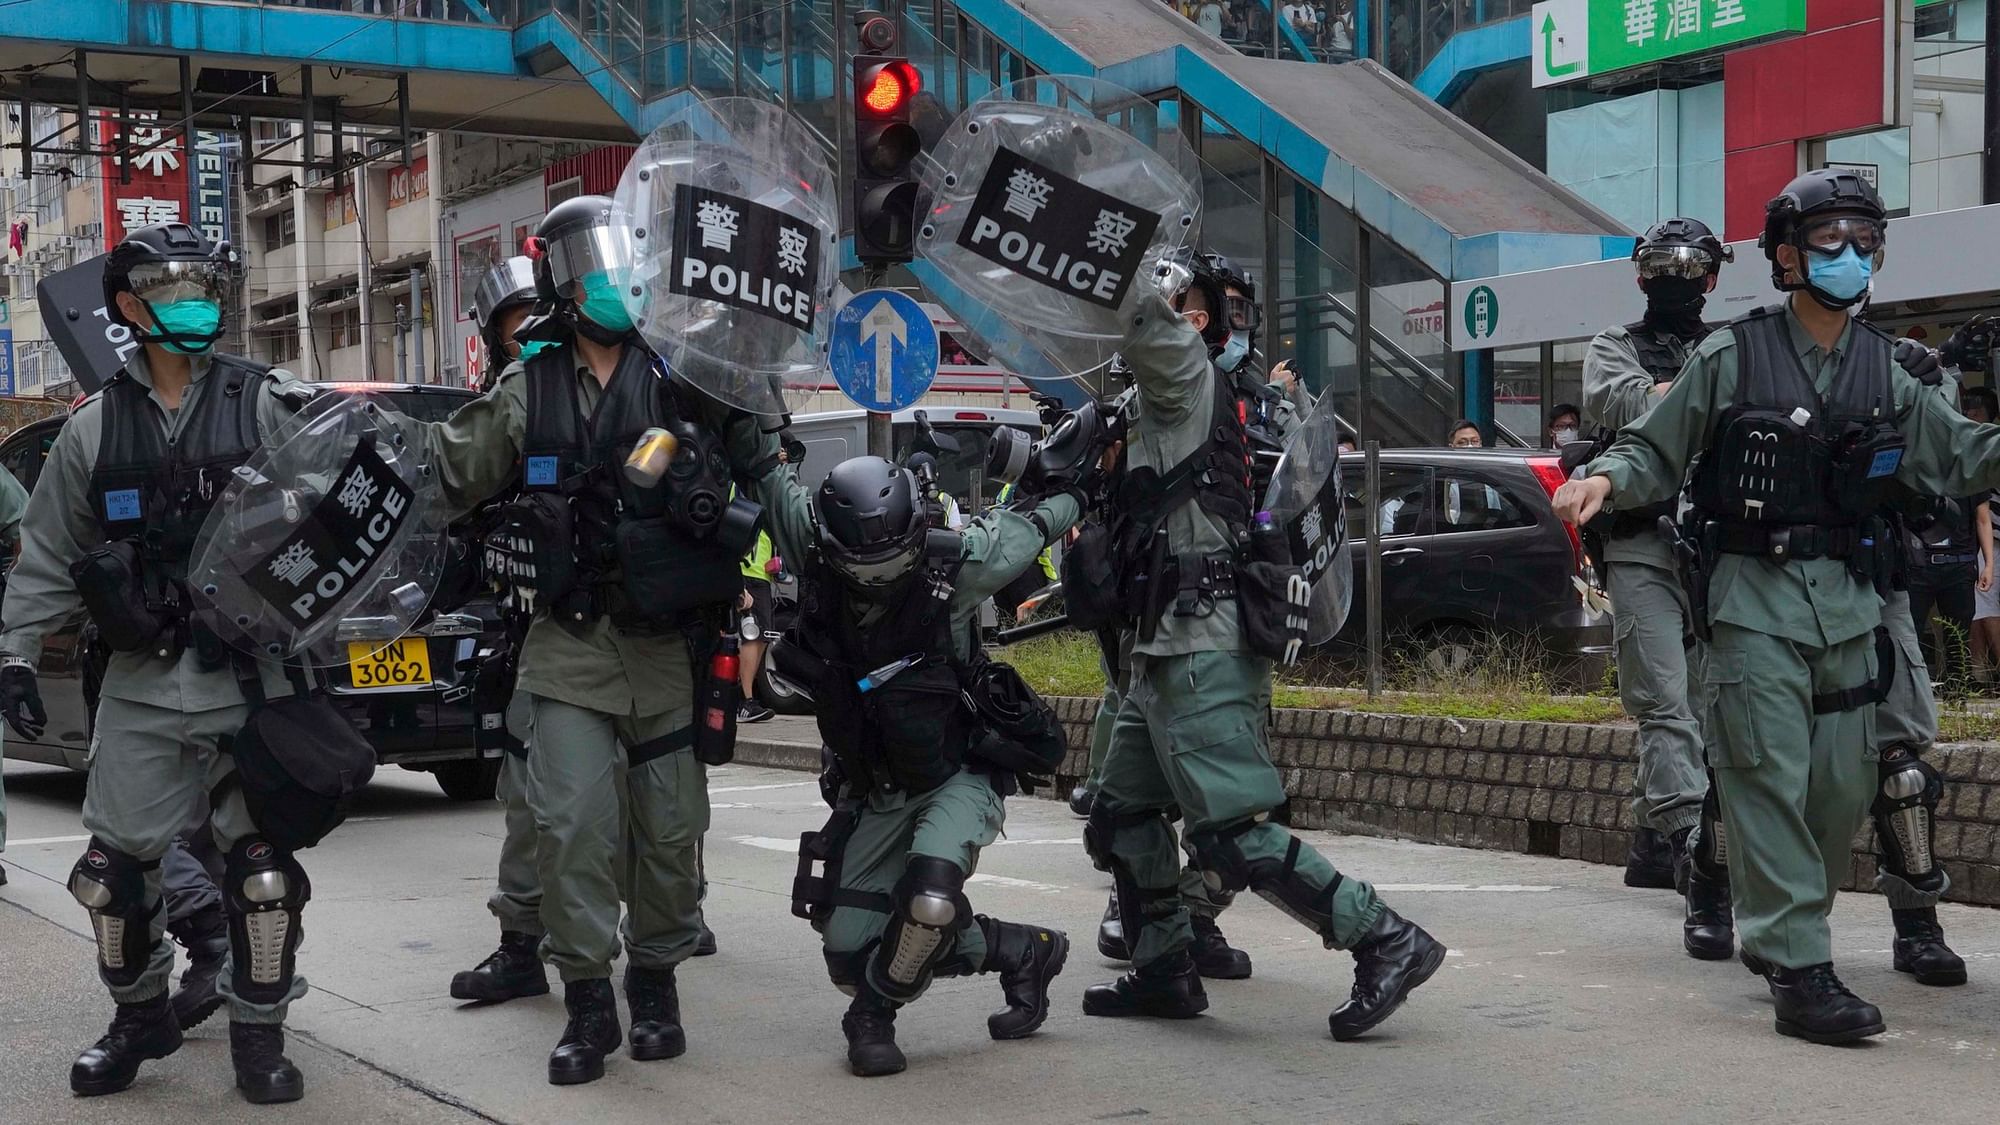 Riot police cover themselves with shields as hundreds of protesters march along a downtown street during a pro-democracy protest against Beijing's national security legislation in Hong Kong, Sunday, 24 May 2020.